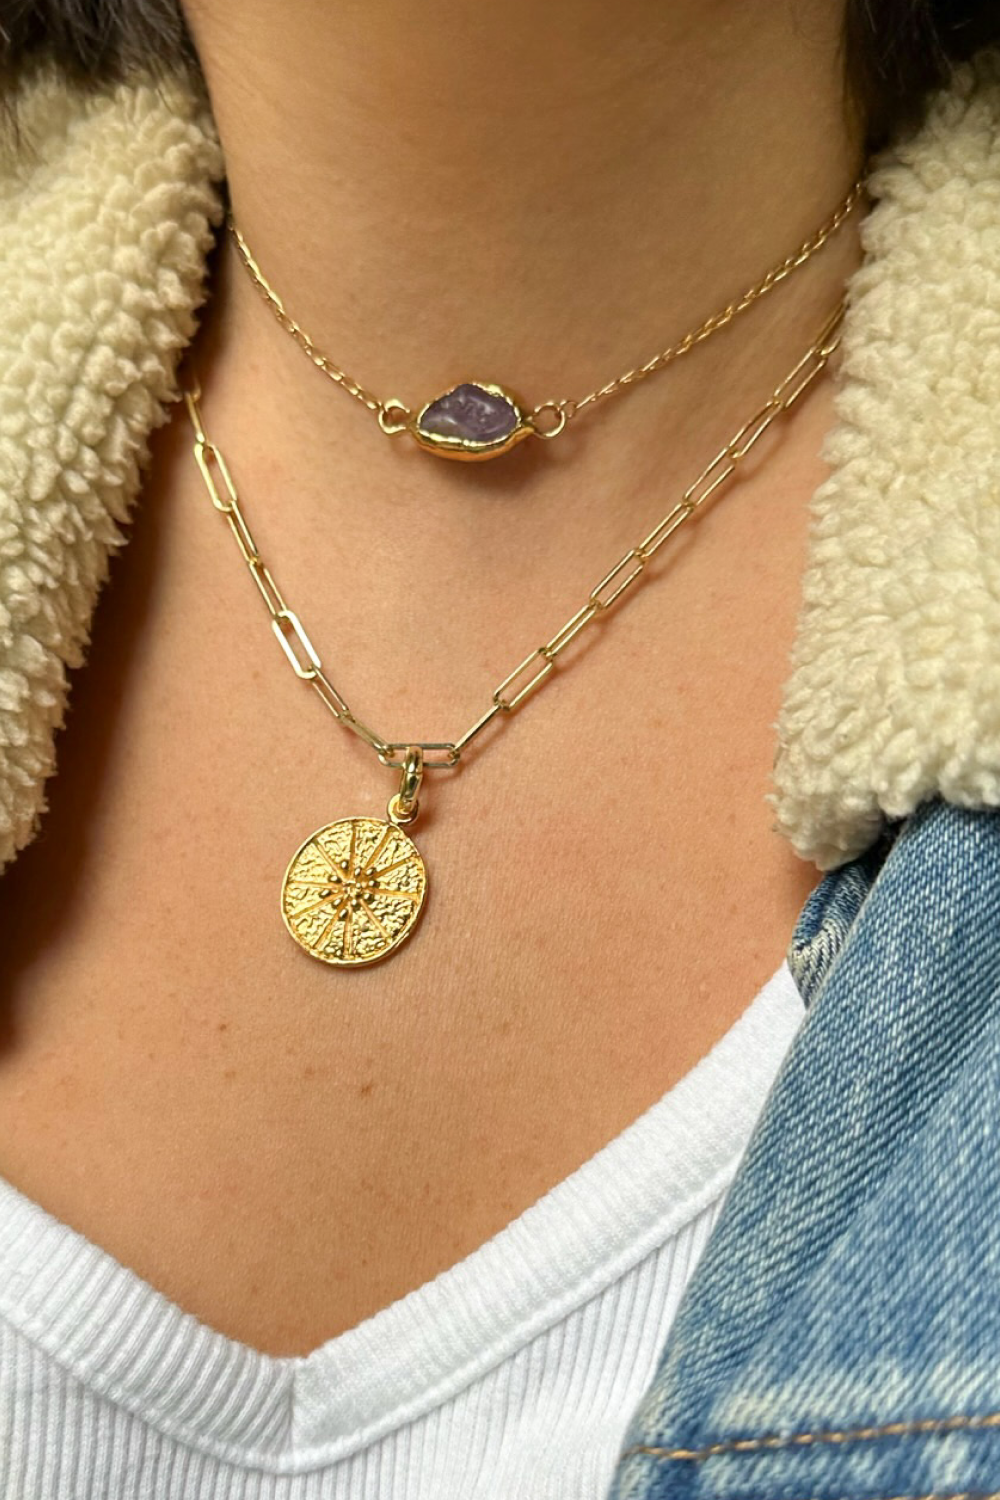 Gold Link Chain Necklace - Tea & Tequila